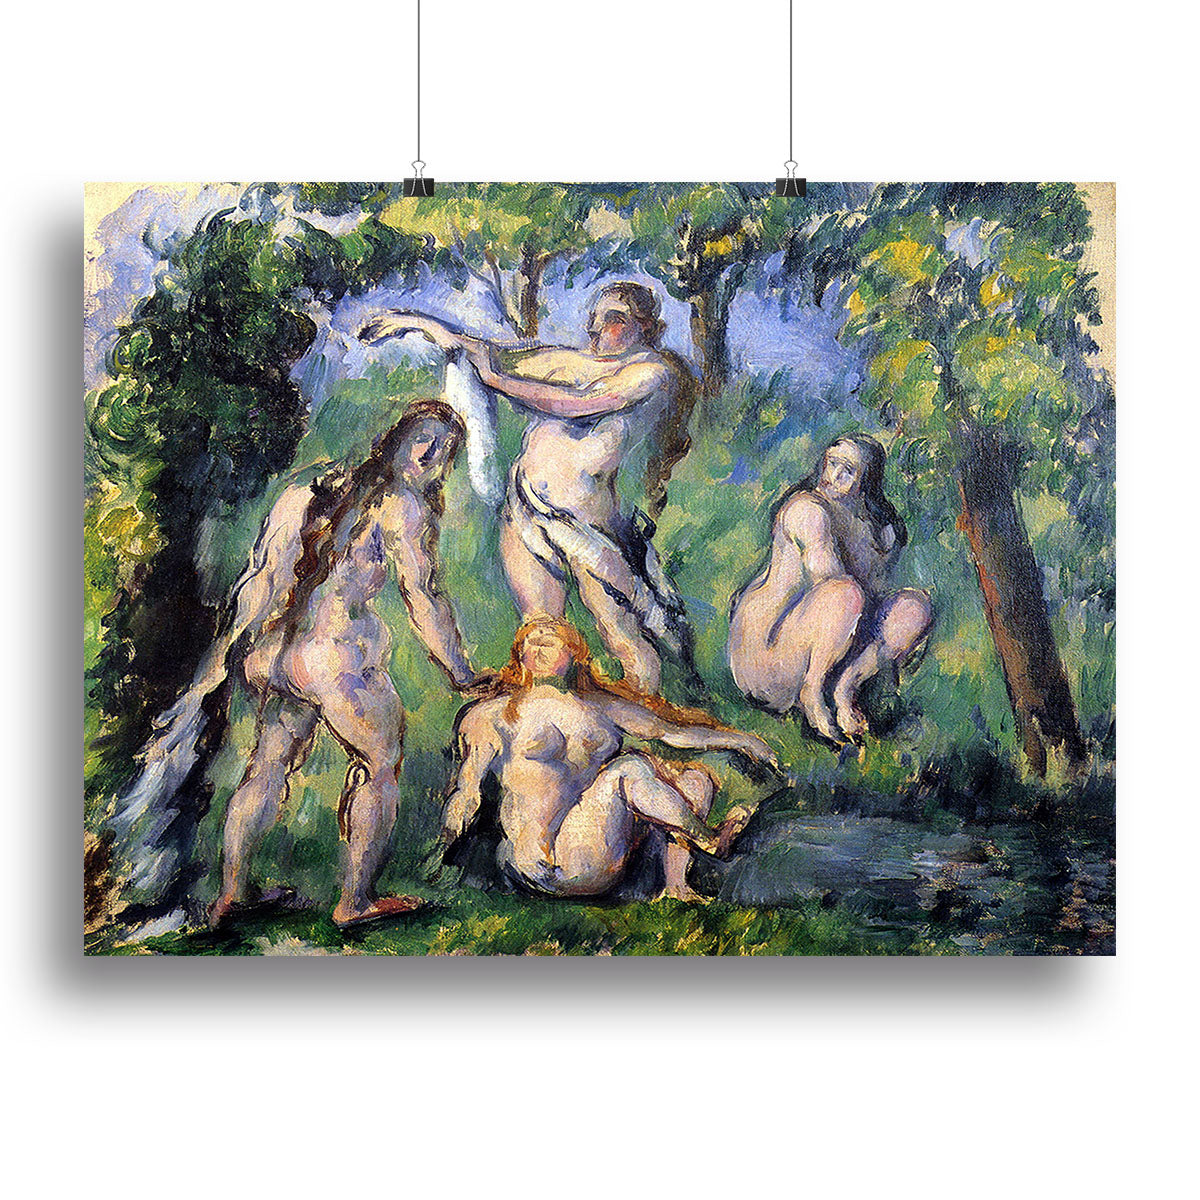 Bathers 2 by Cezanne Canvas Print or Poster - Canvas Art Rocks - 2